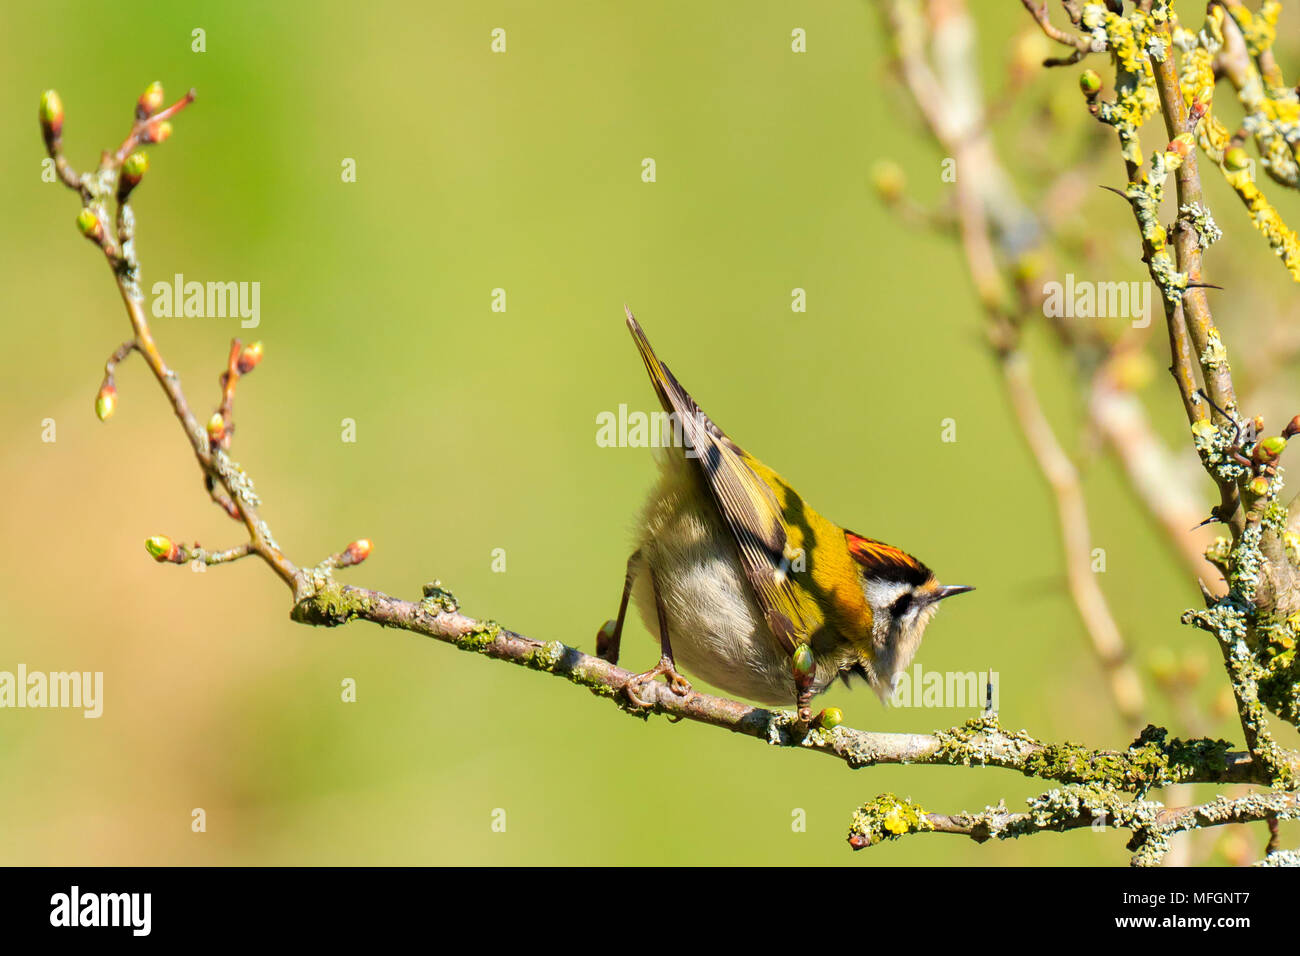 Closeup of a small common firecrest (Regulus ignicapilla) bird foraging through branches of trees and bush during Springtime on a sunny day Stock Photo